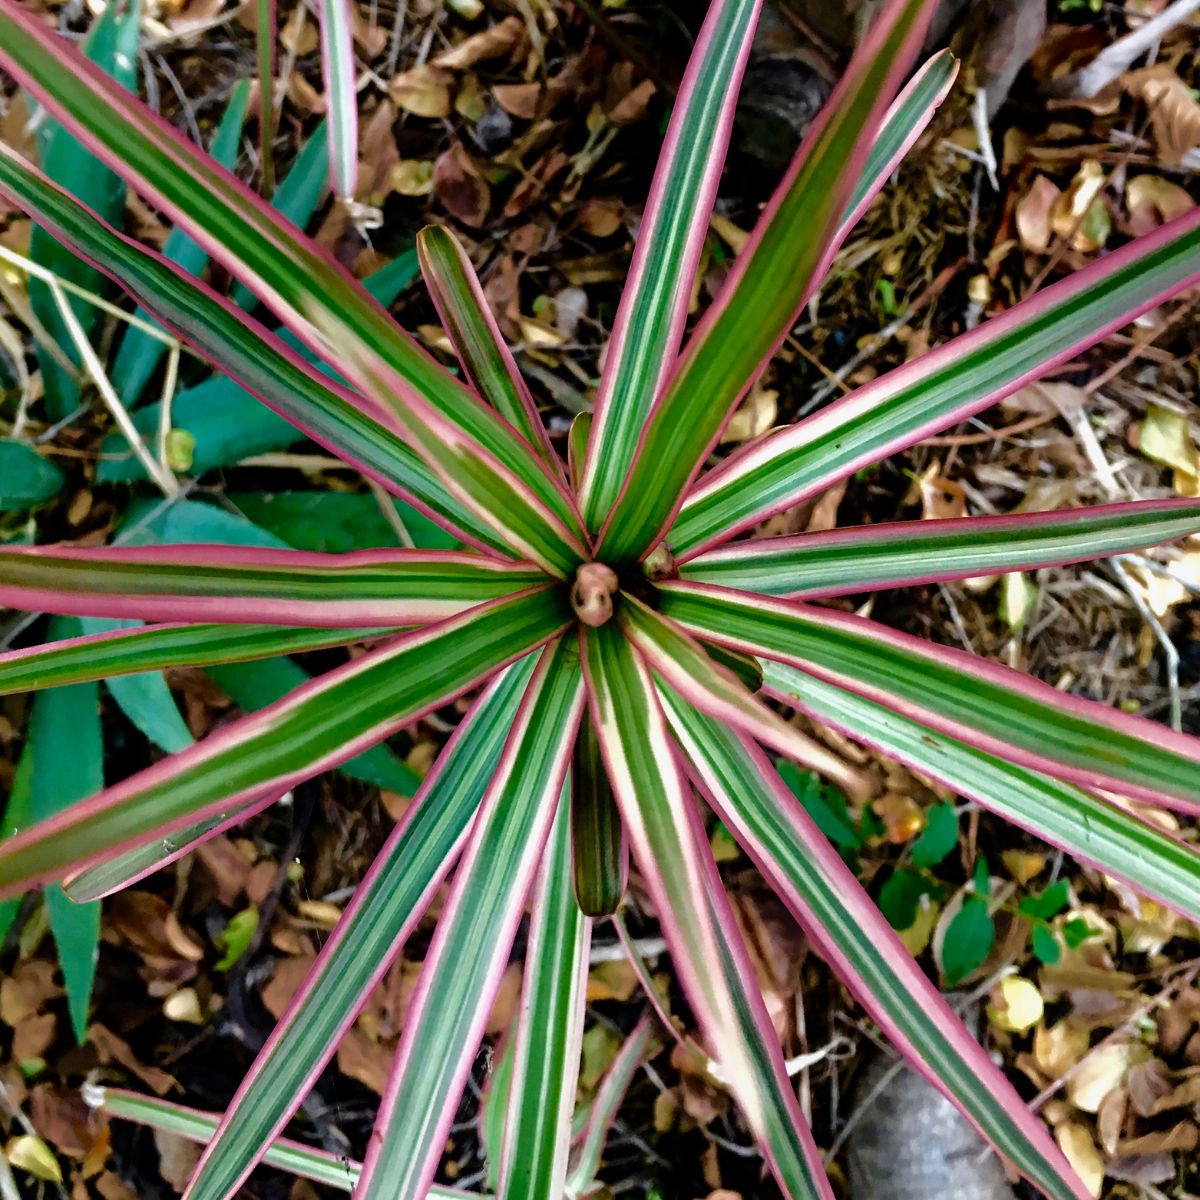 Red-Edged Dracena with green leaves and red edges.